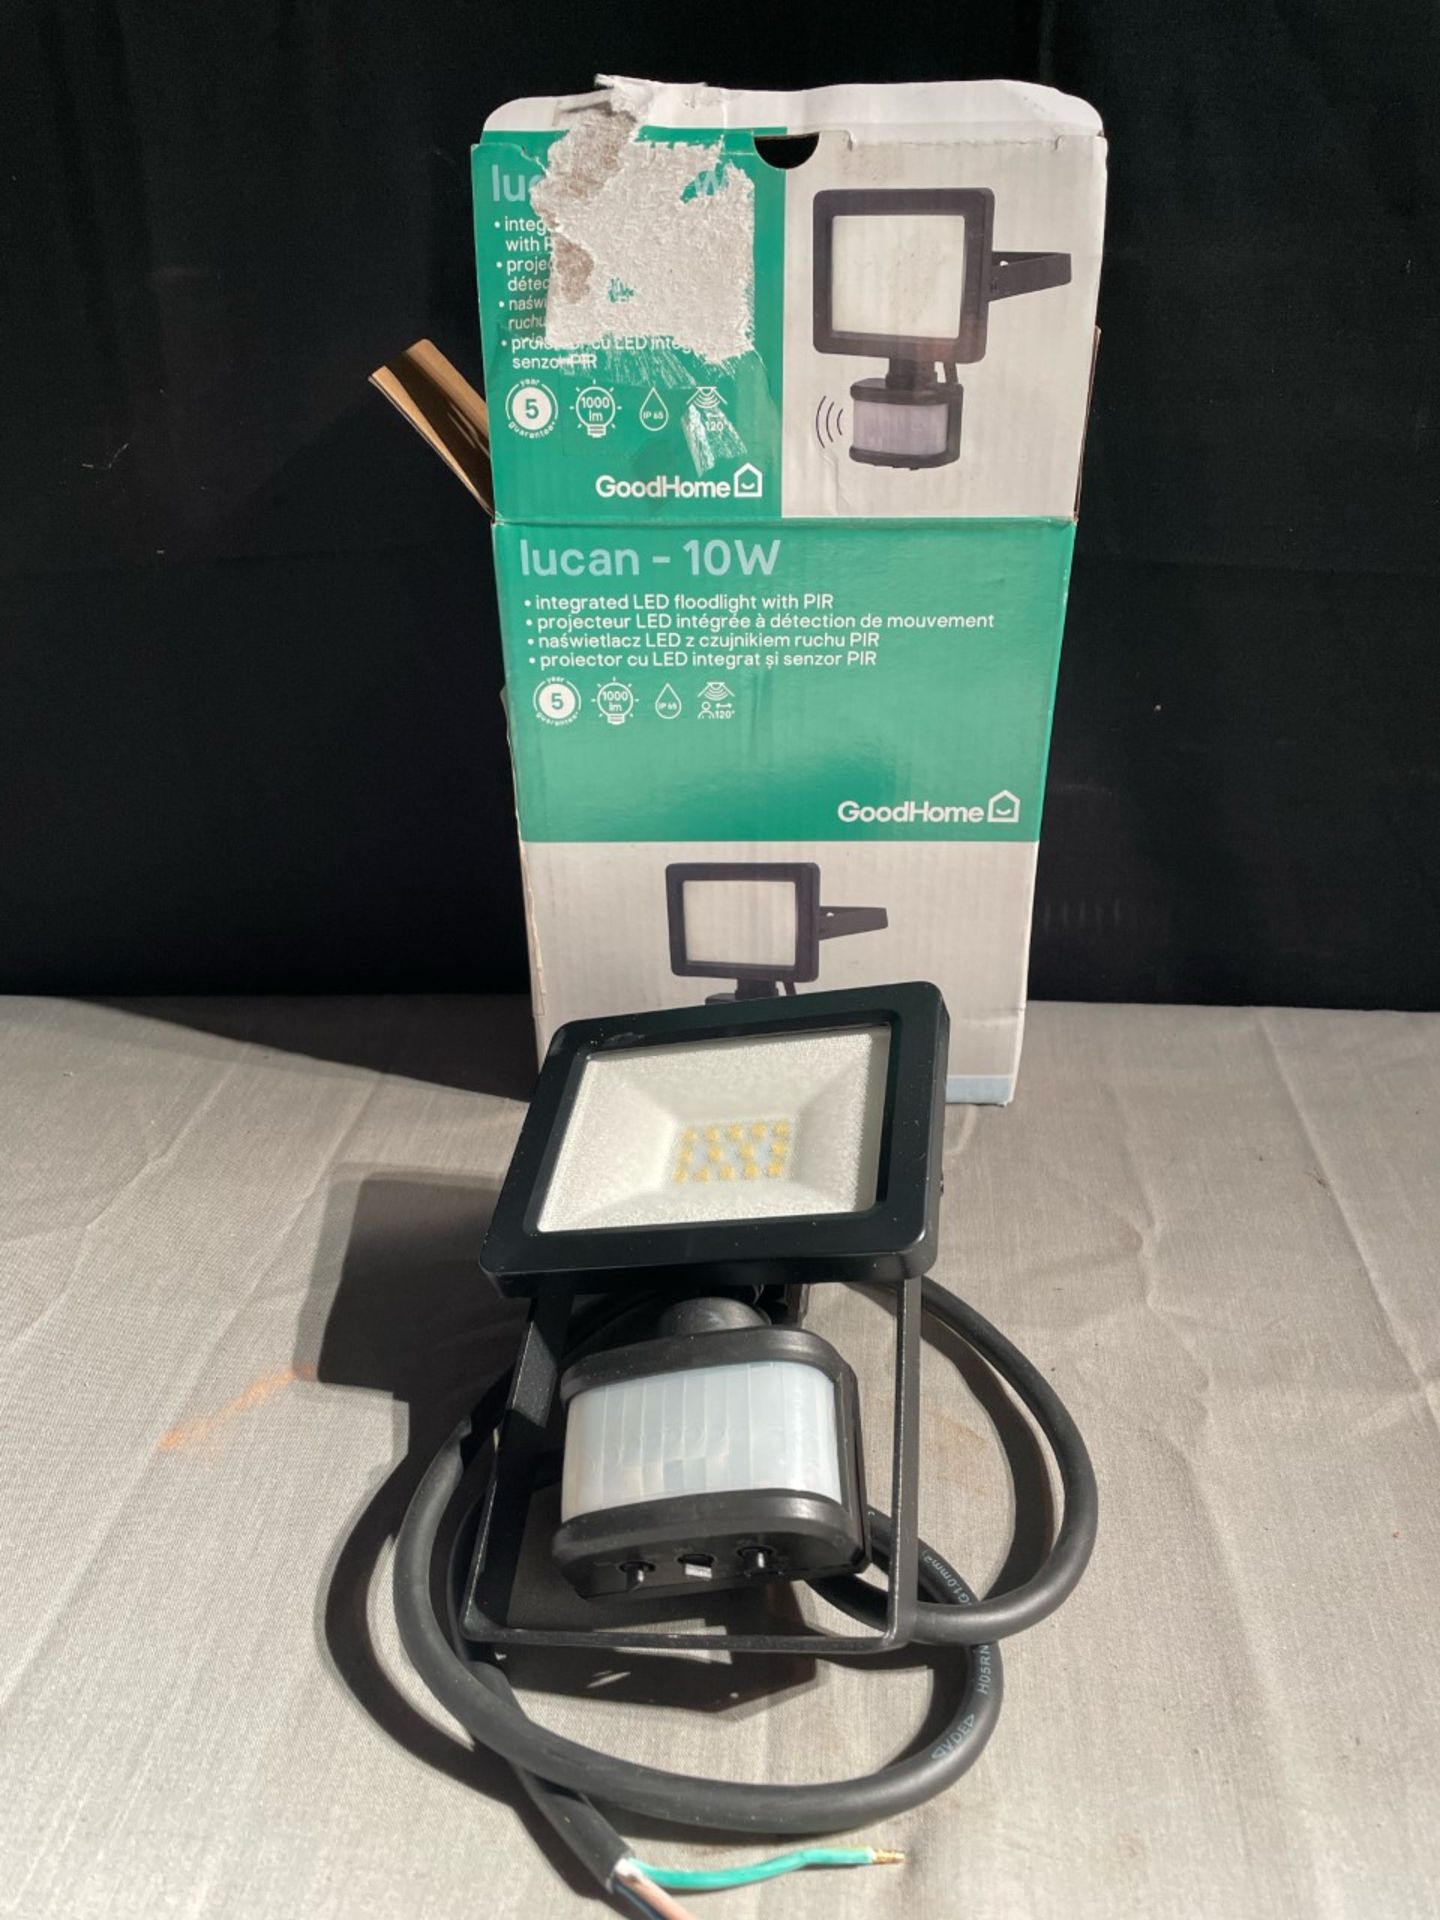 Lucan 10W integrated LED floodlight. New in box